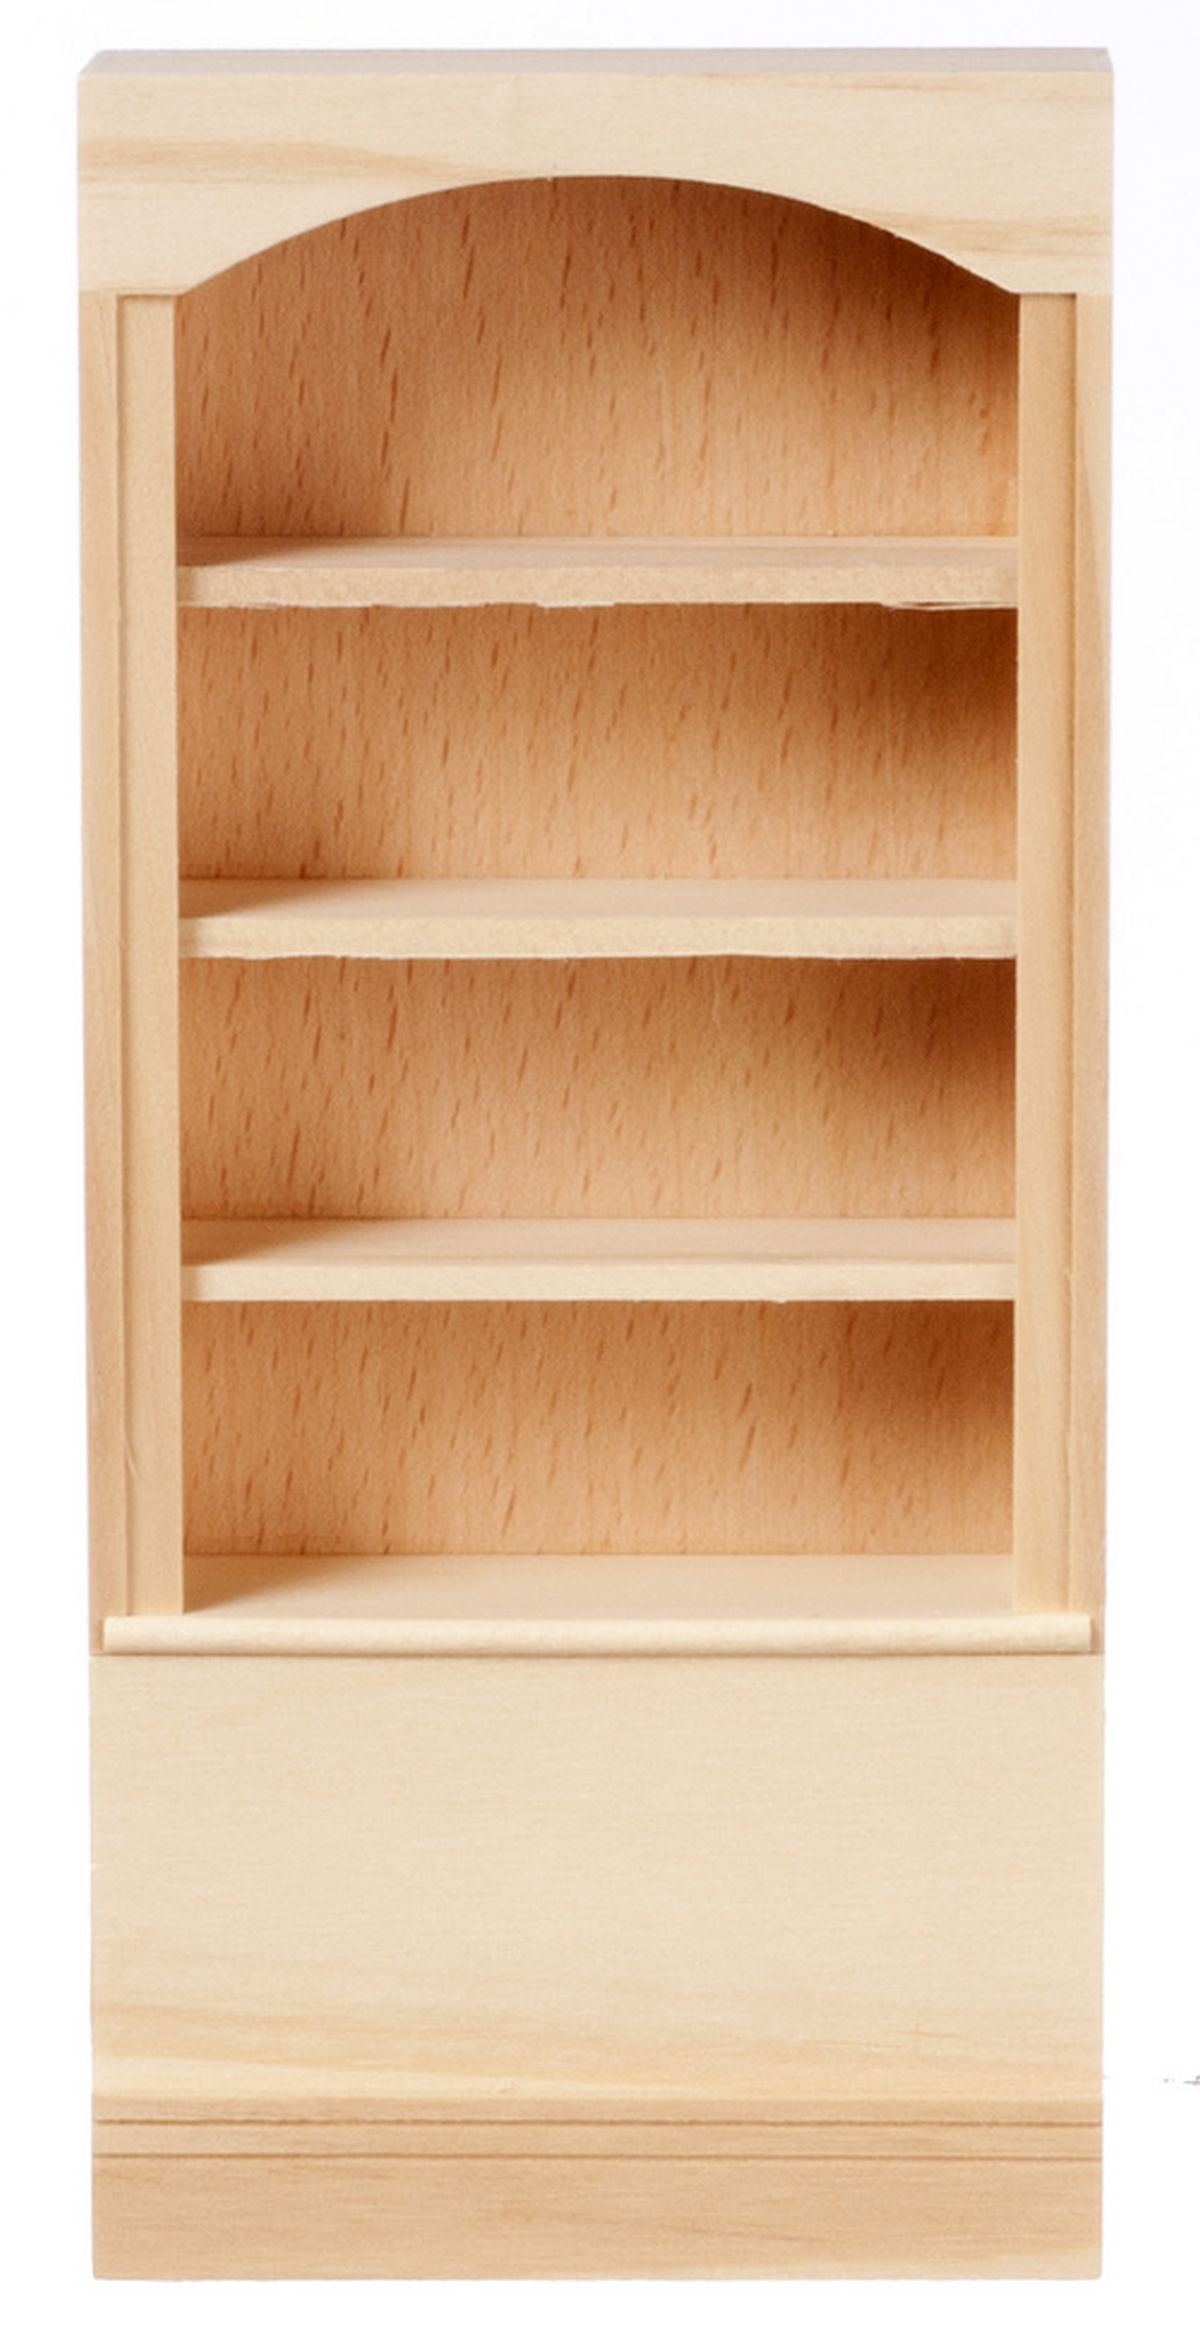 Unfinished Wood 4-Shelf Bookcase by Houseworks